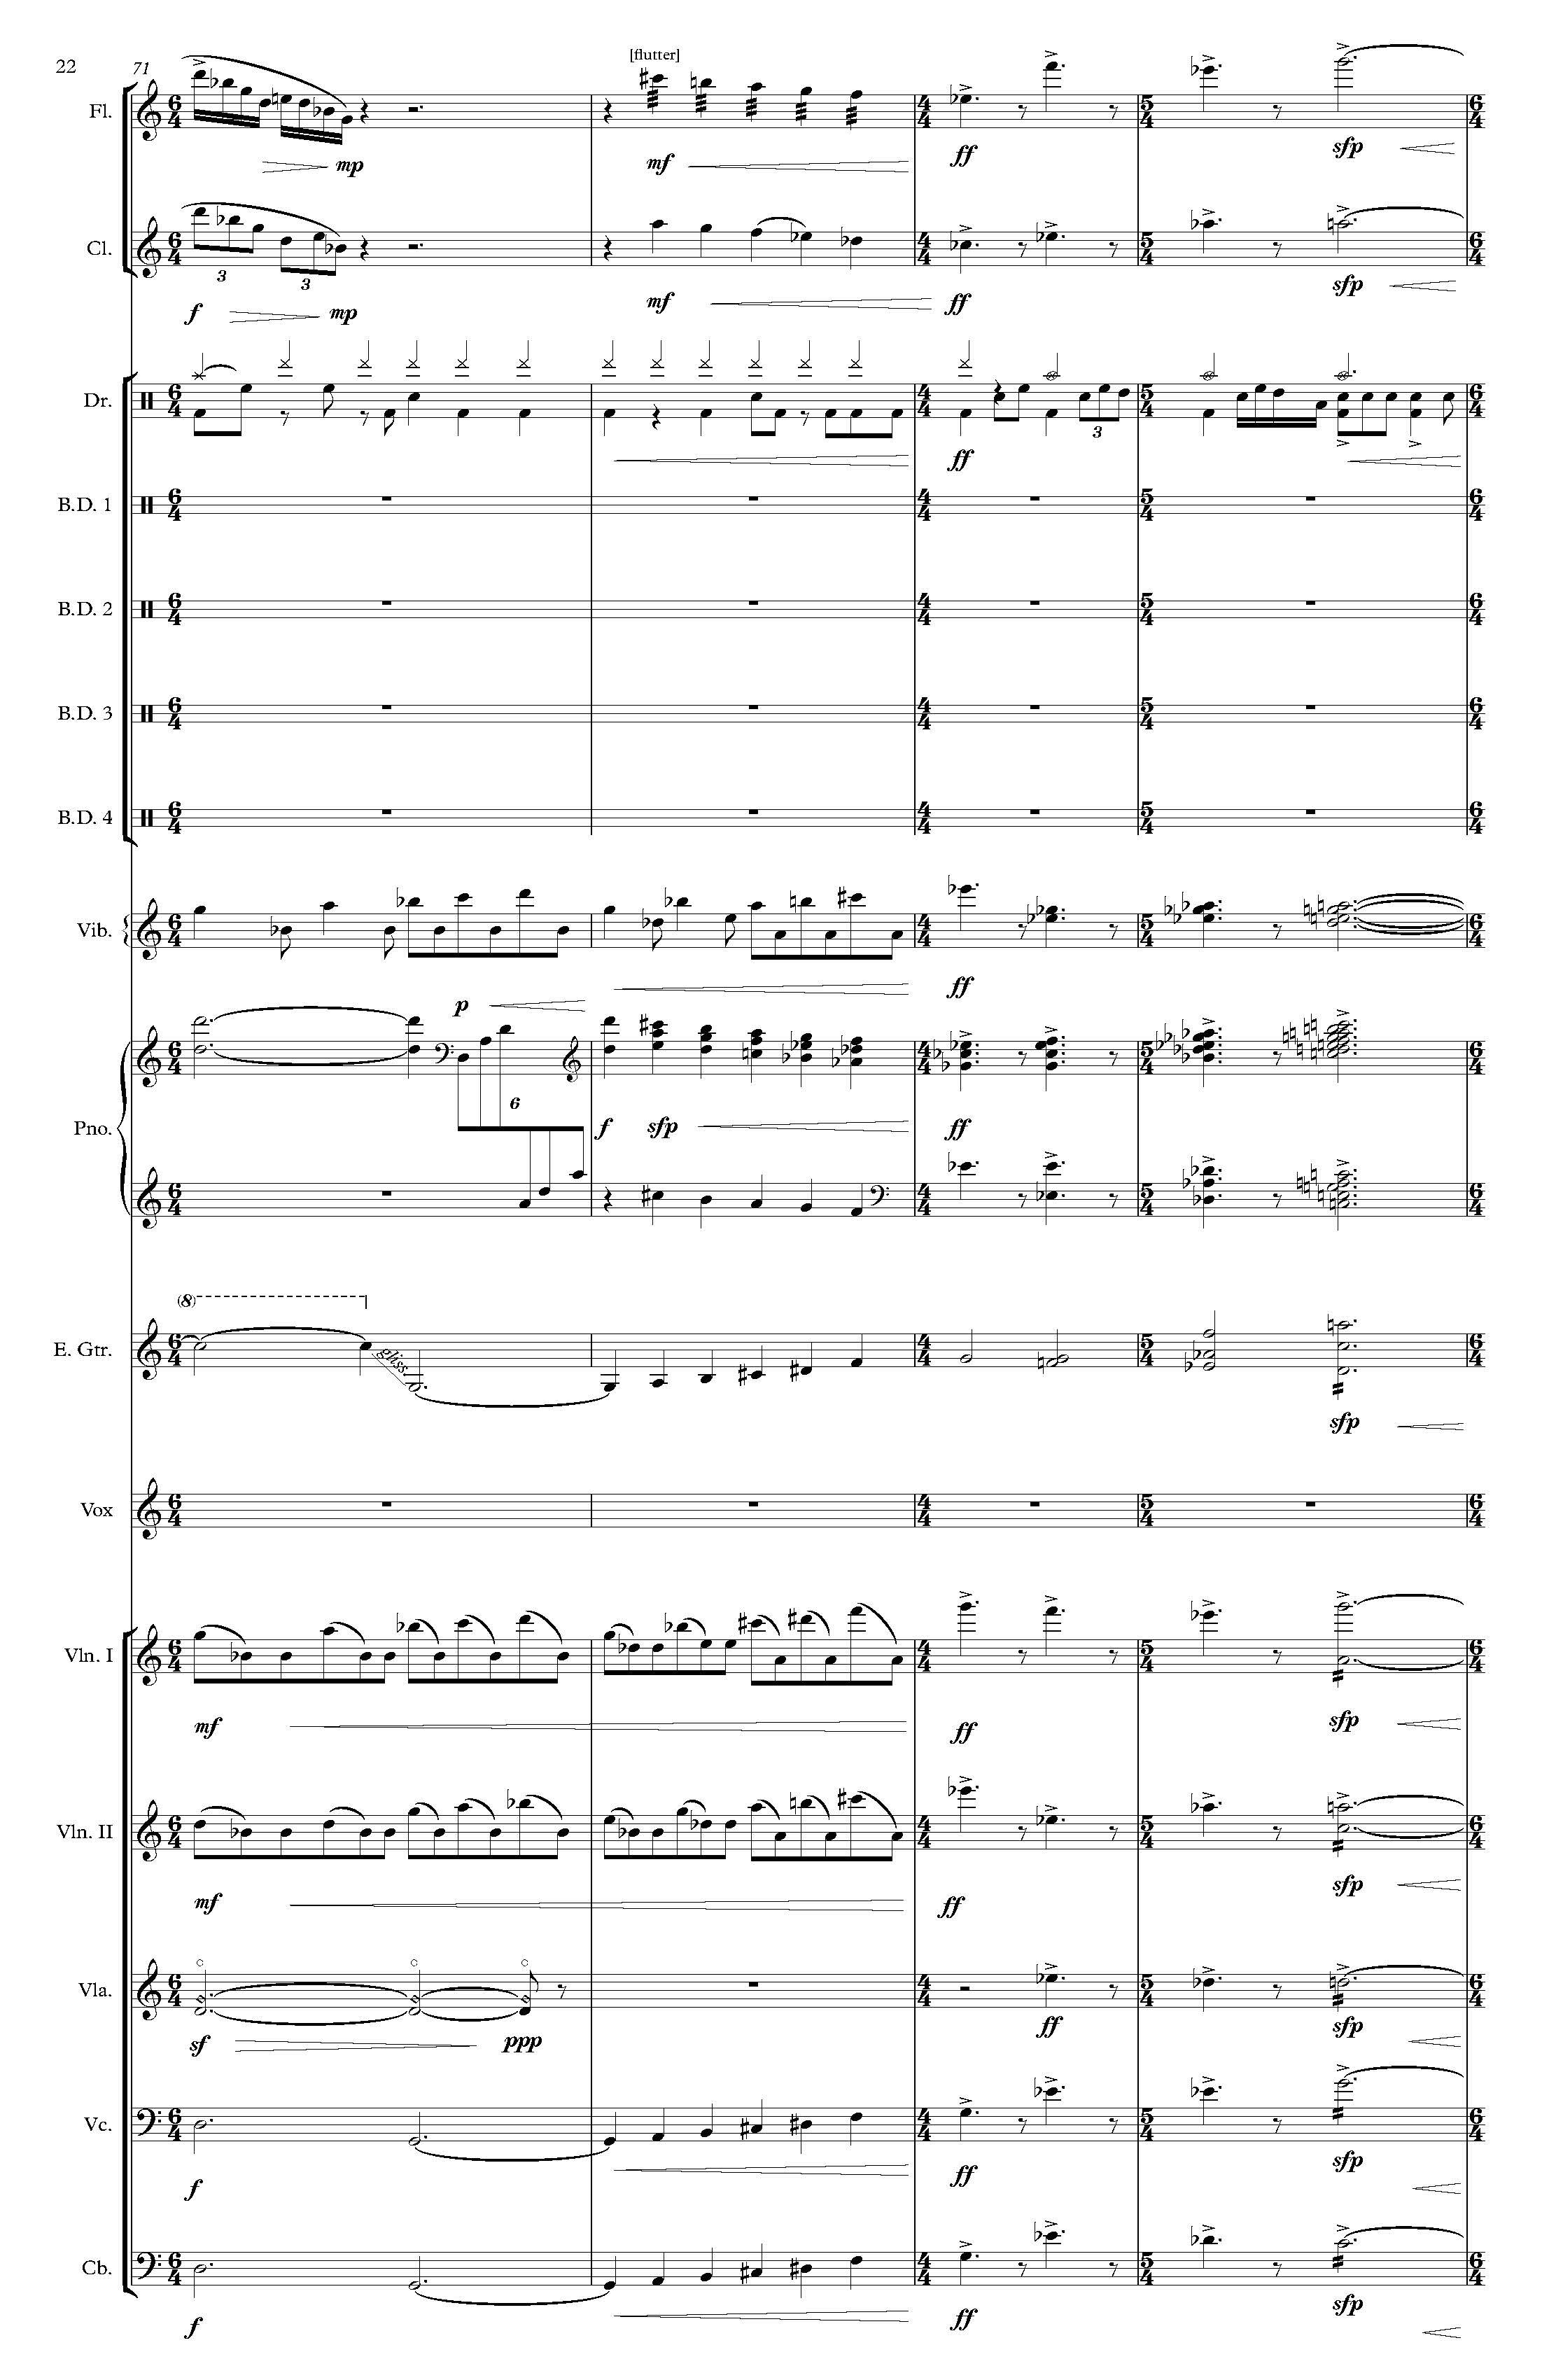 The Rembrandt of Avenue A - Complete Score_Page_28.jpg